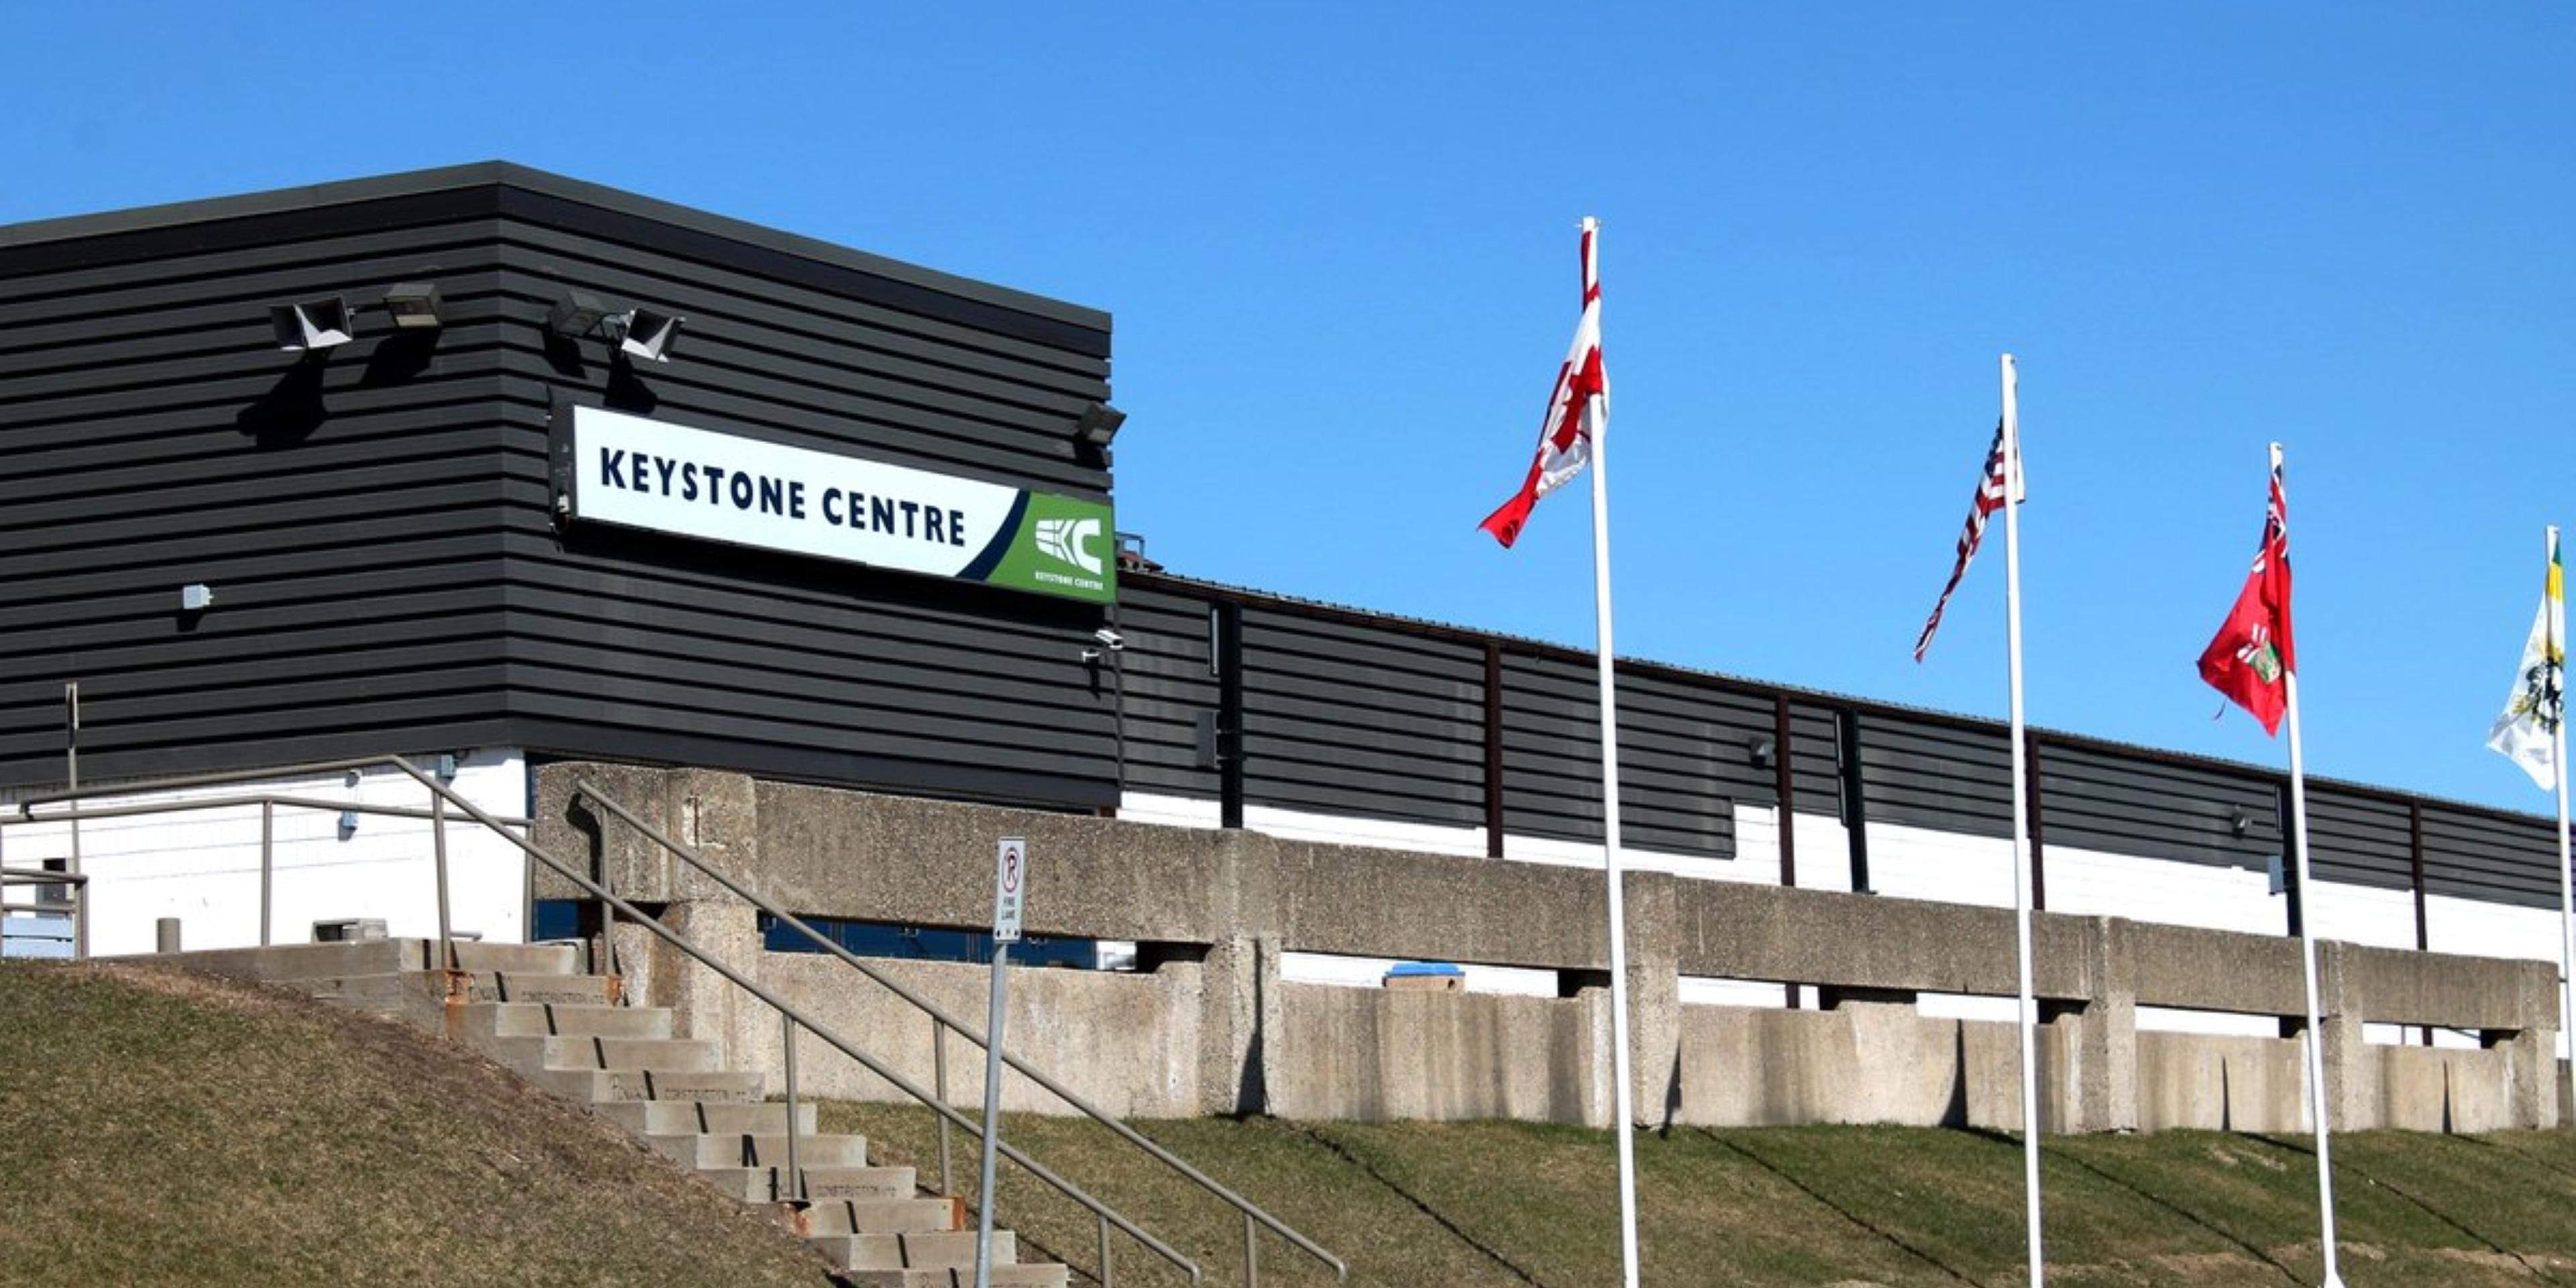 We are conveniently located right across the street from Keystone Centre, which is a multi-level facility that allows for large scale events, meetings, conferences, graduations, conventions and many other types of events.  The facility also includes the Brandon Curling Club, Westobia Place Ice Rink and Westobia AG Center.